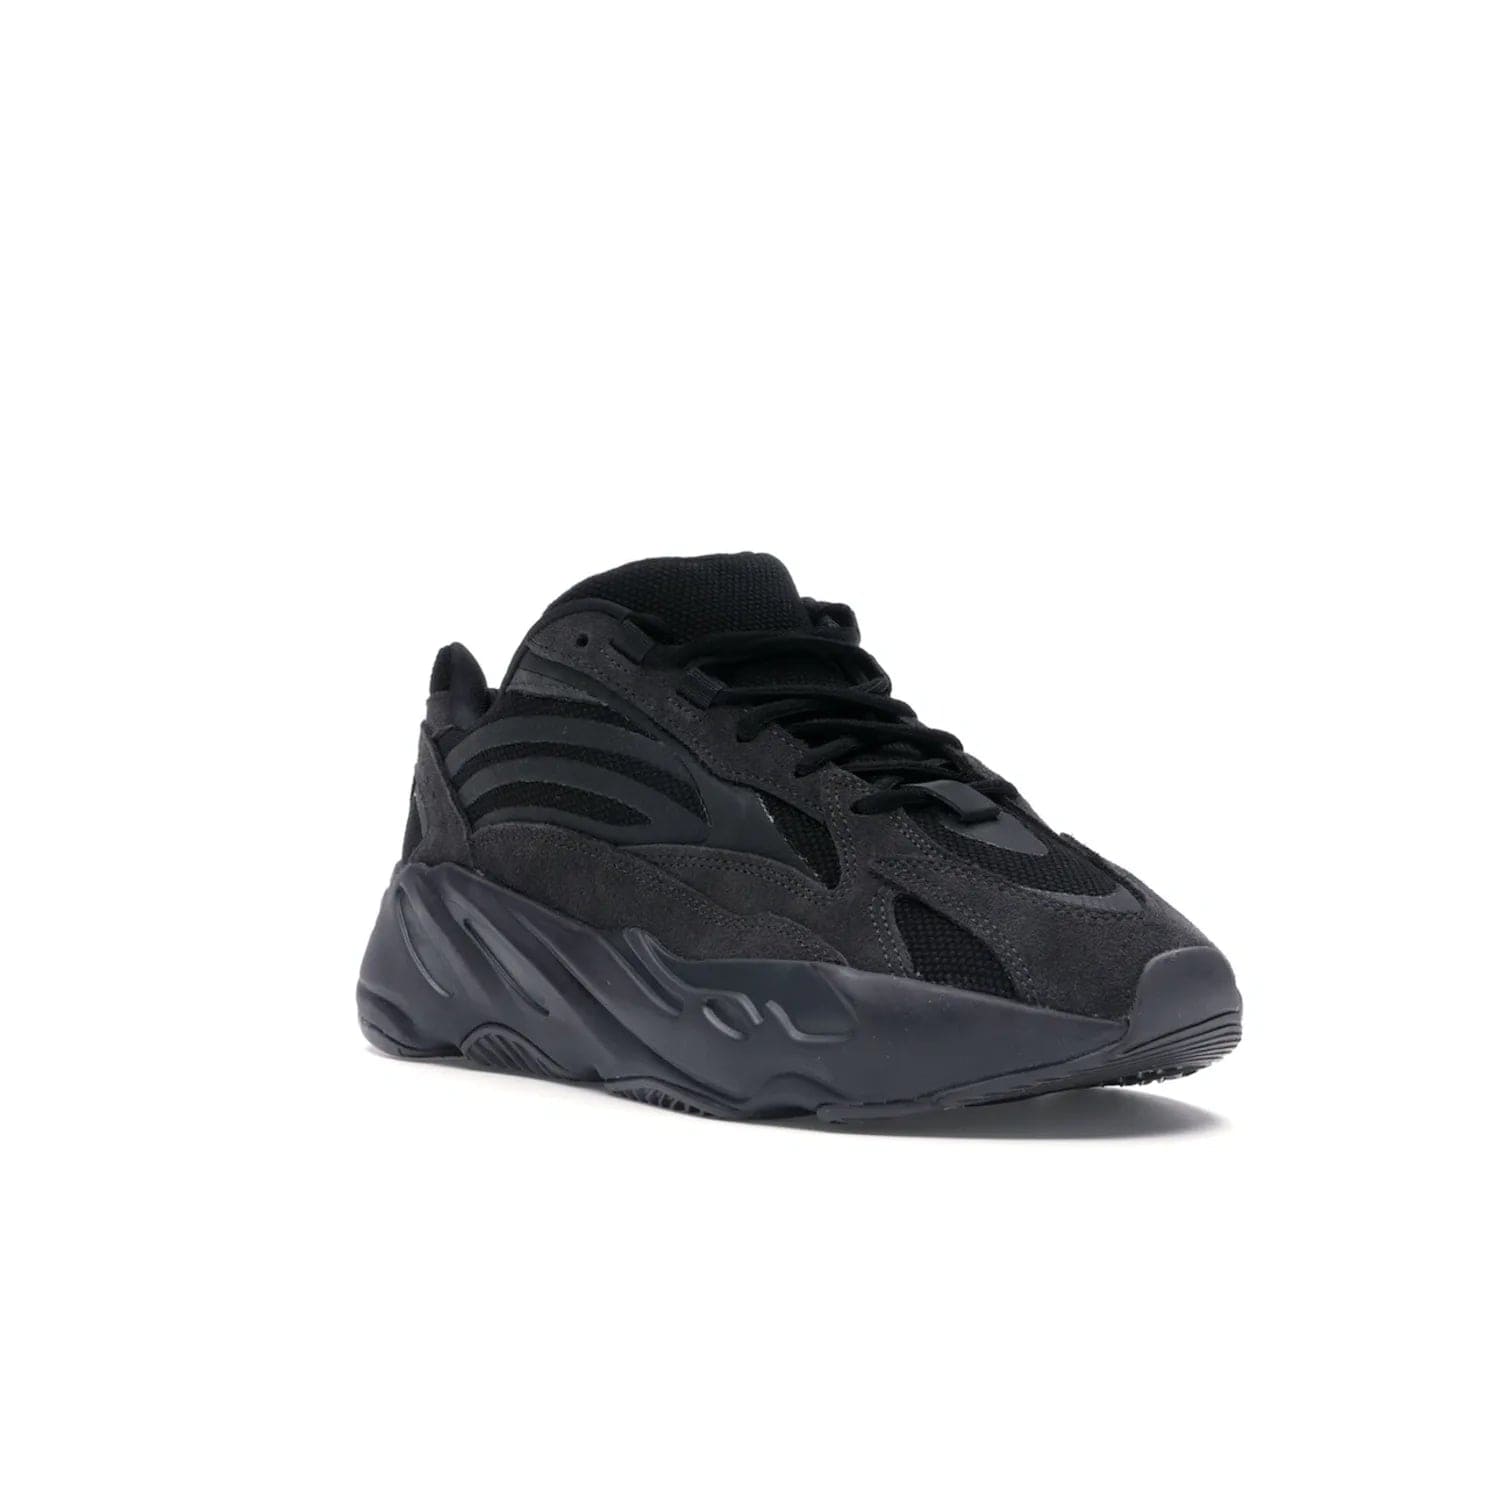 adidas Yeezy Boost 700 V2 Vanta - Image 6 - Only at www.BallersClubKickz.com - Introducing the adidas Yeezy Boost 700 V2 Vanta - a sleek and stylish all-black design featuring a combination of mesh, leather, and suede construction with signature Boost cushioning in the sole. The ultimate in comfort and support.